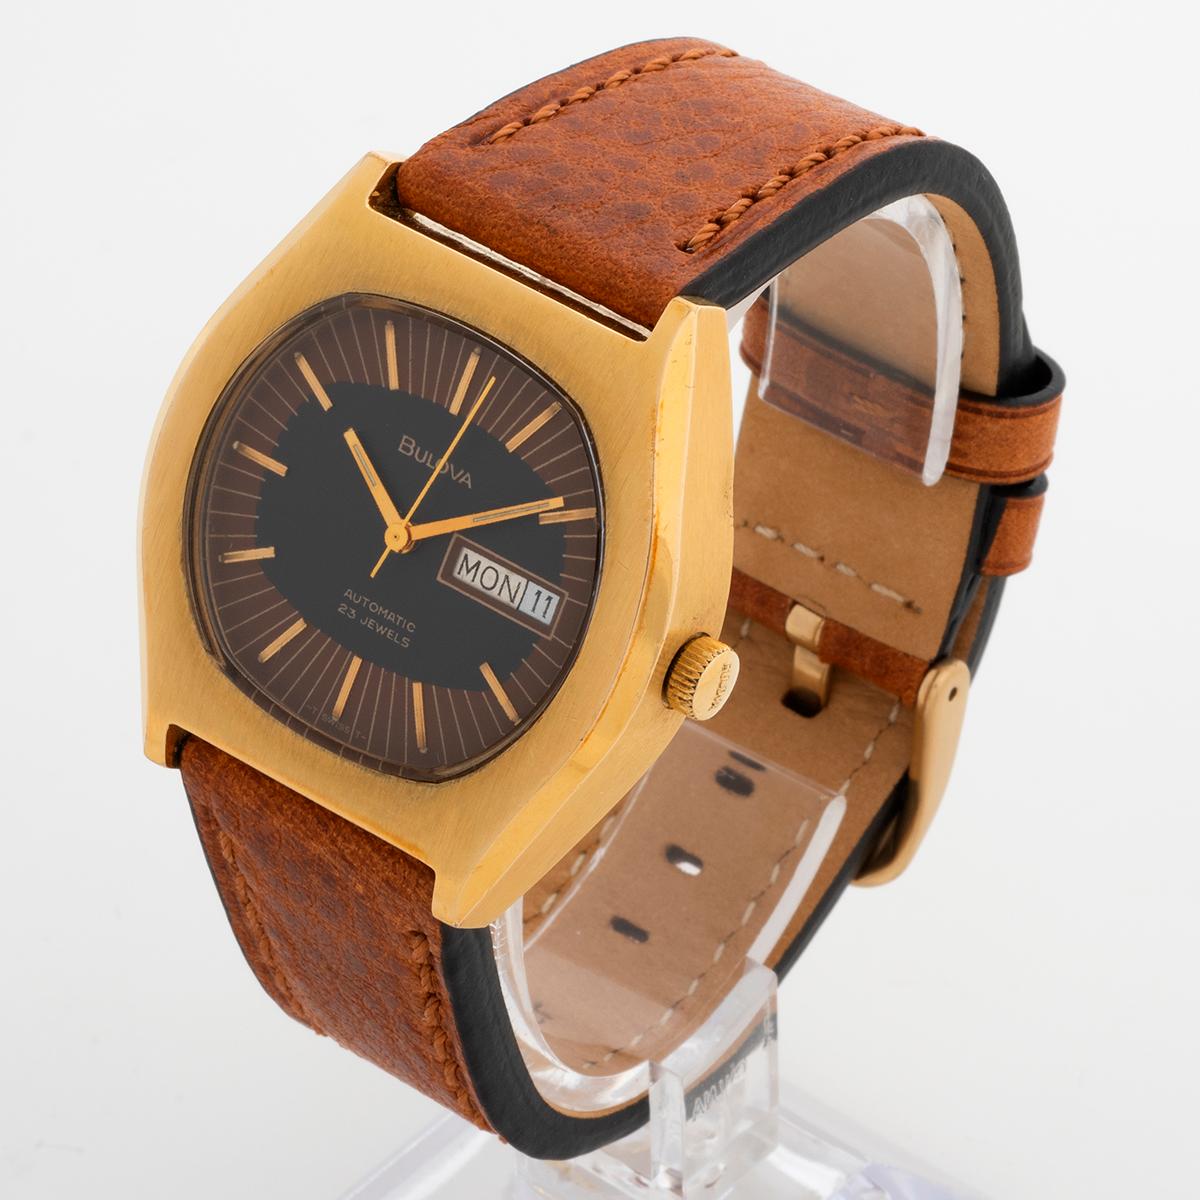 Our very retro vintage Bulova automatic N2 has a gold plated x mm case of stainless steel with heavy gold plate and is fitted to a new quality leather strap with gold tone tang buckle. Presented in excellent condition for its age, we date production